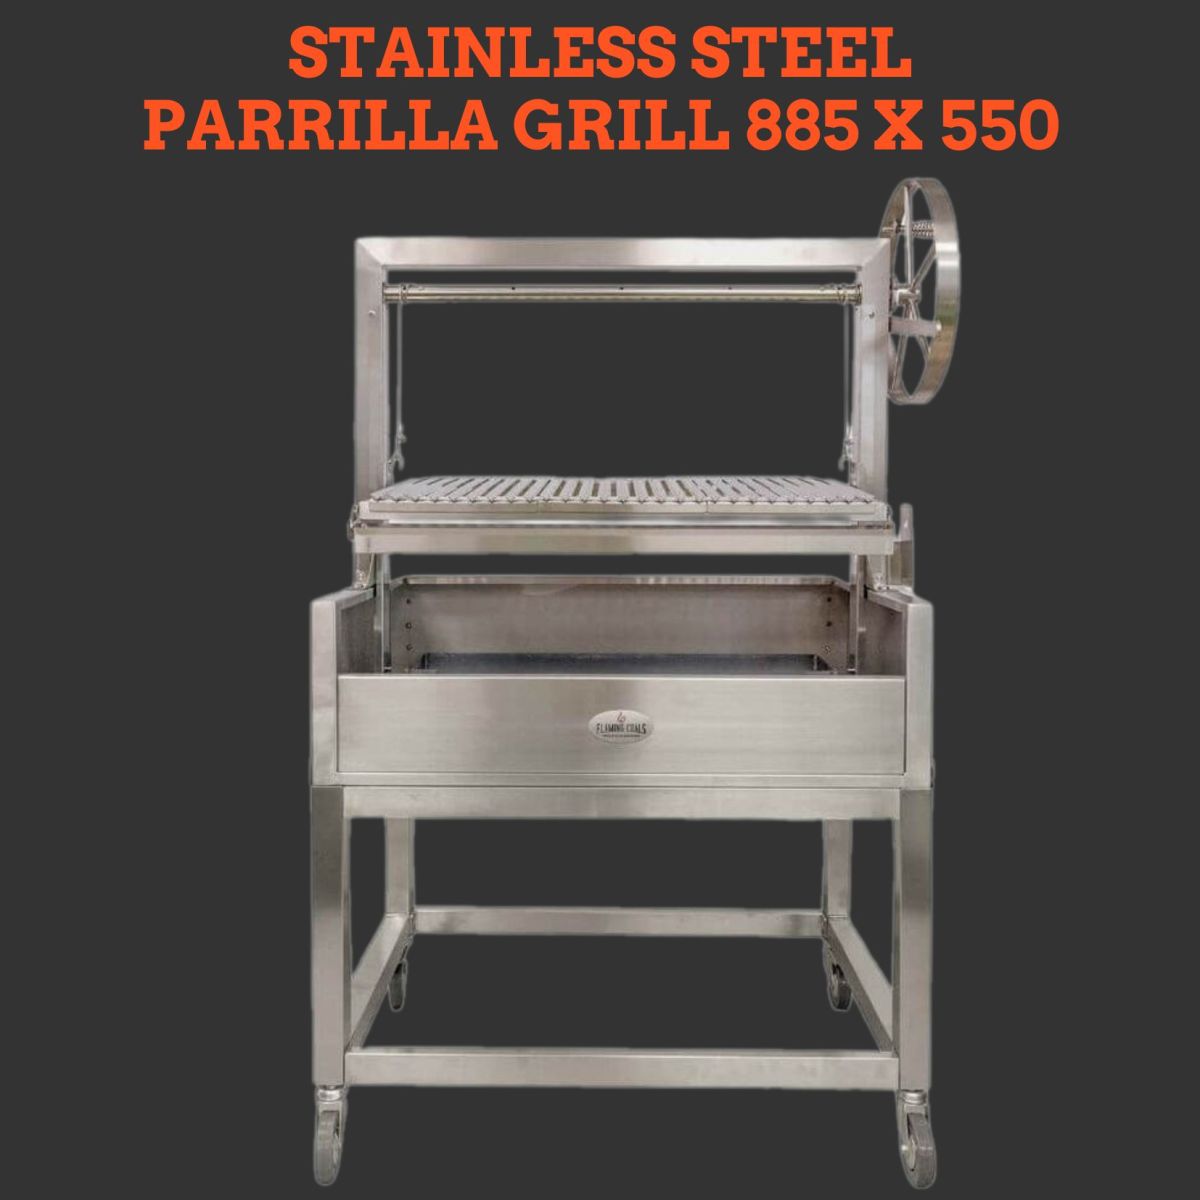 This_image-show_Stainless_Steel_Parrilla_Grill_885_550